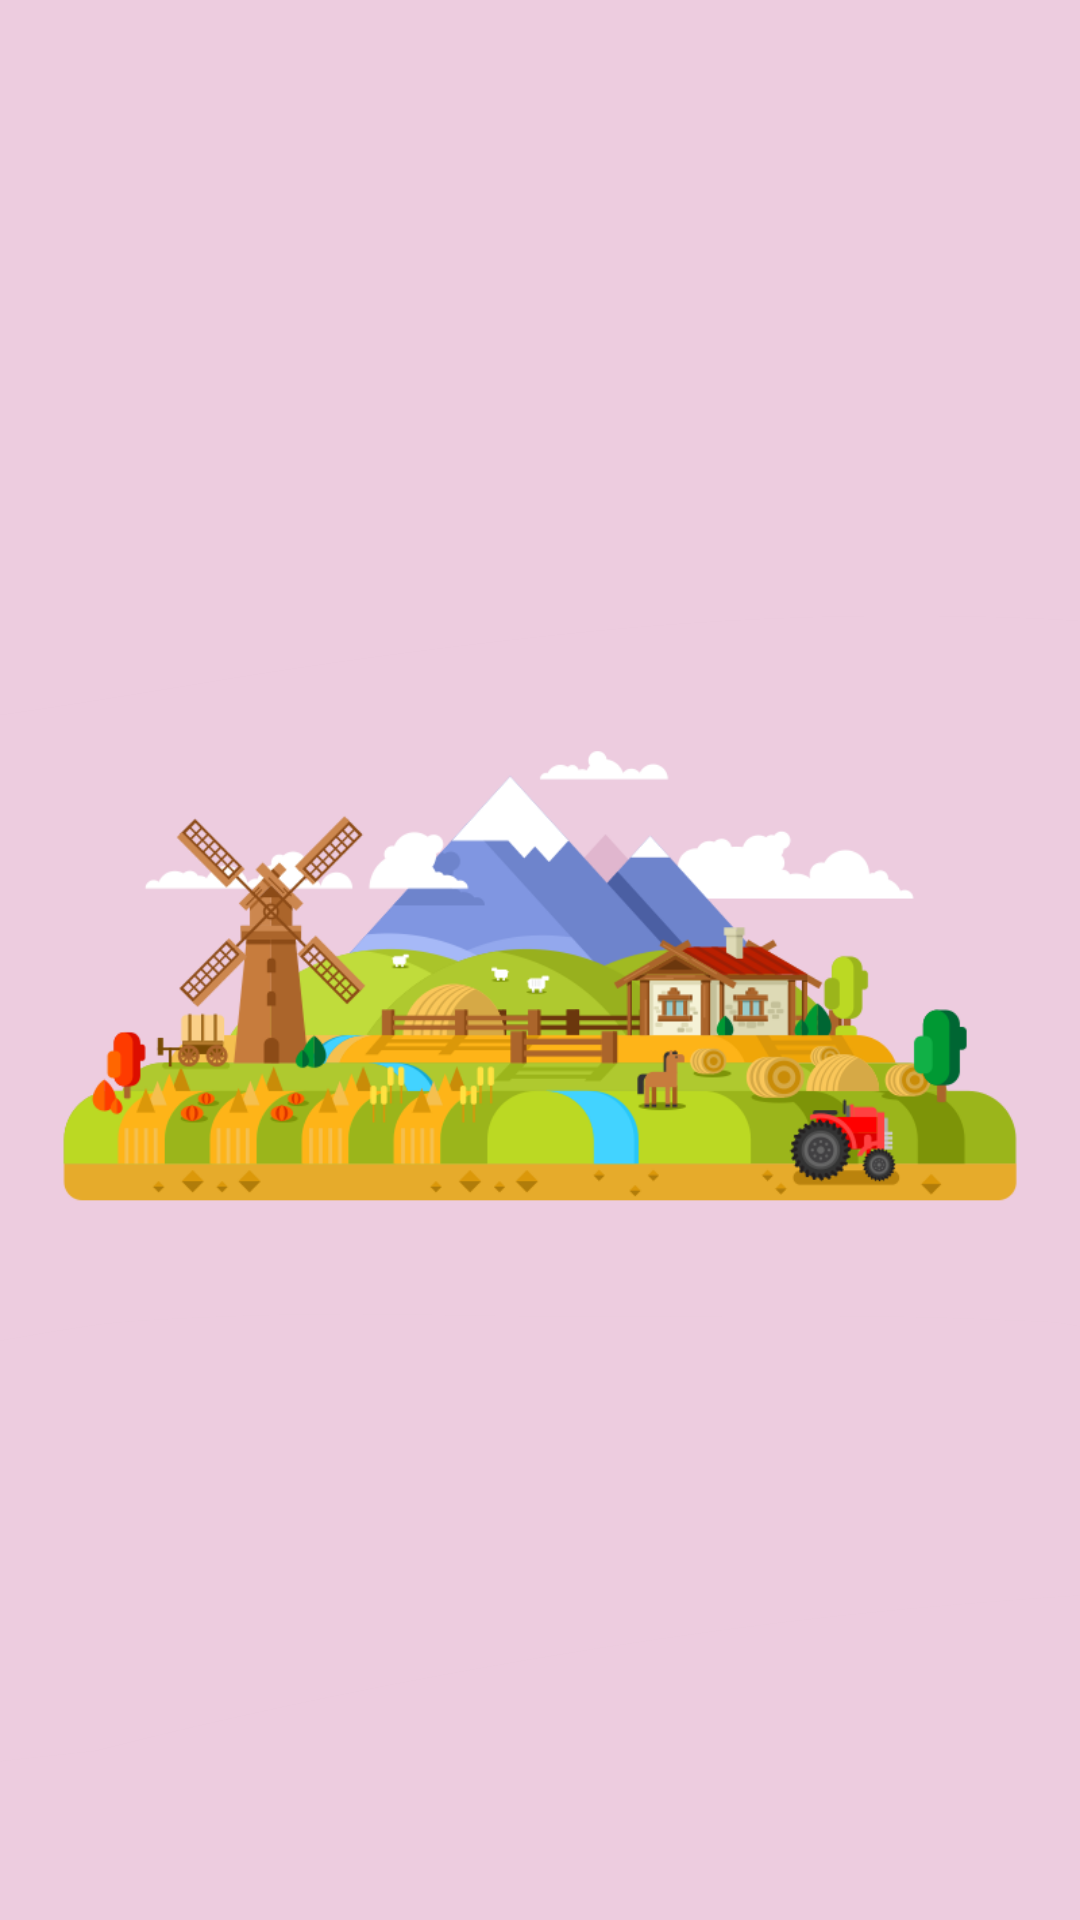 General 1080x1920 minimalism simple background artwork mountains windmill tractors vehicle